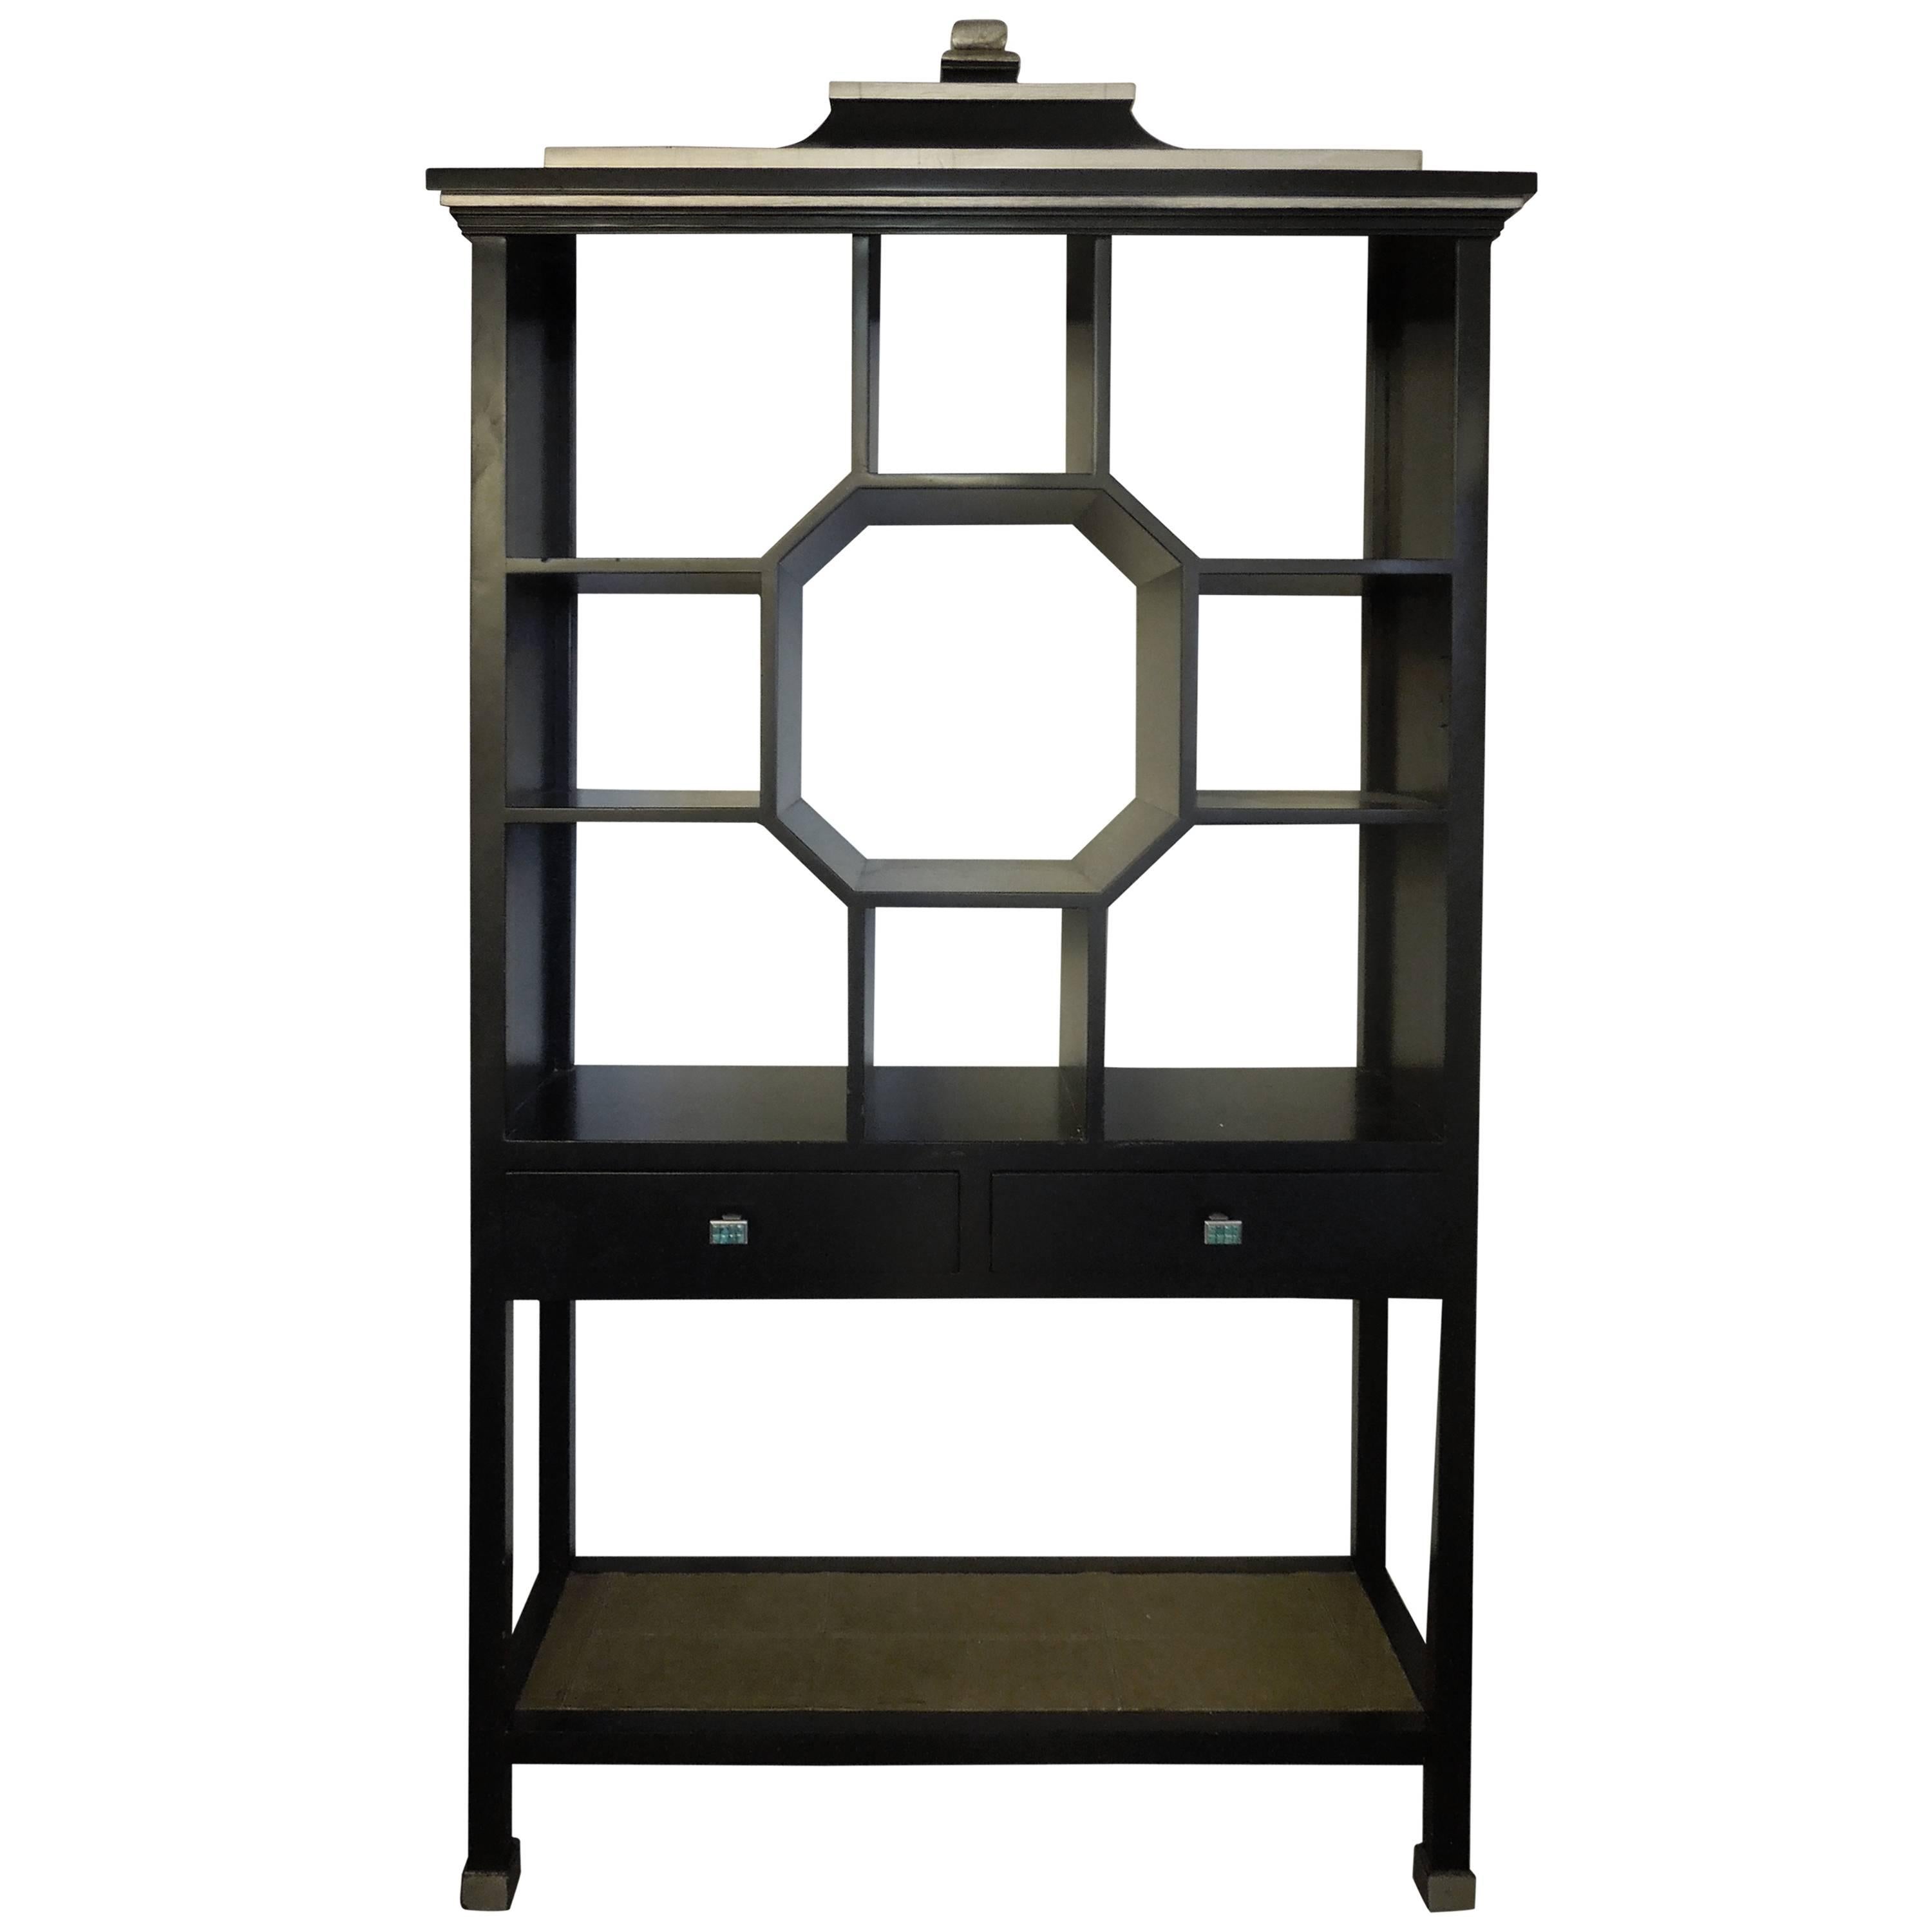 Modern Version Dorothy Draper Style Chinoiserie Curio Cabinet